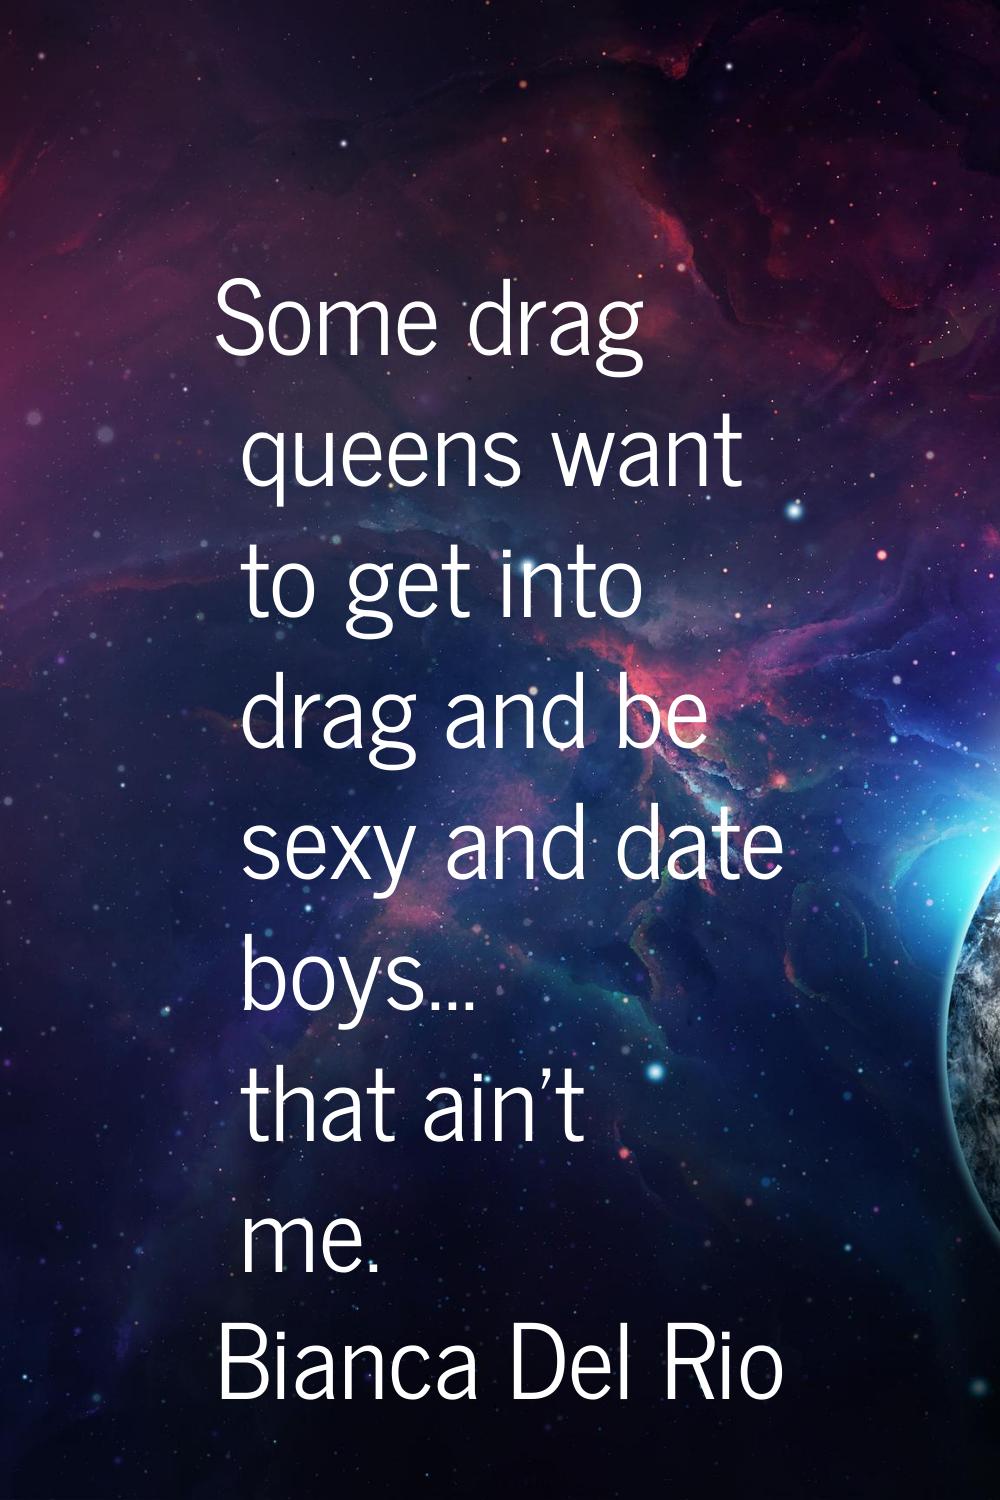 Some drag queens want to get into drag and be sexy and date boys... that ain't me.